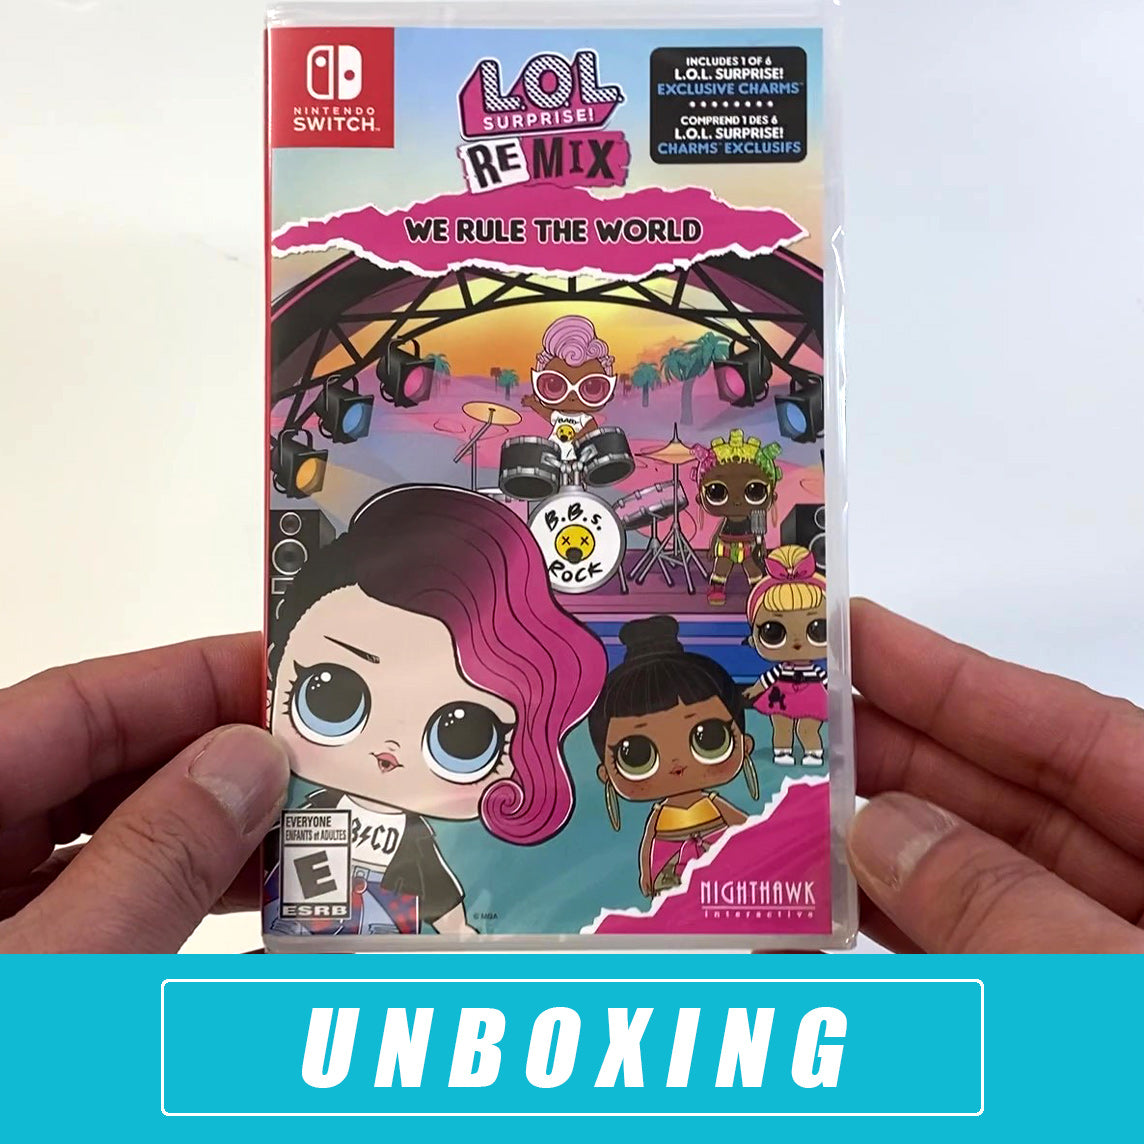 L.O.L Surprise! Remix: We Rule The World - (NSW) Nintendo Switch [UNBOXING] Video Games Nighthawk Interactive   